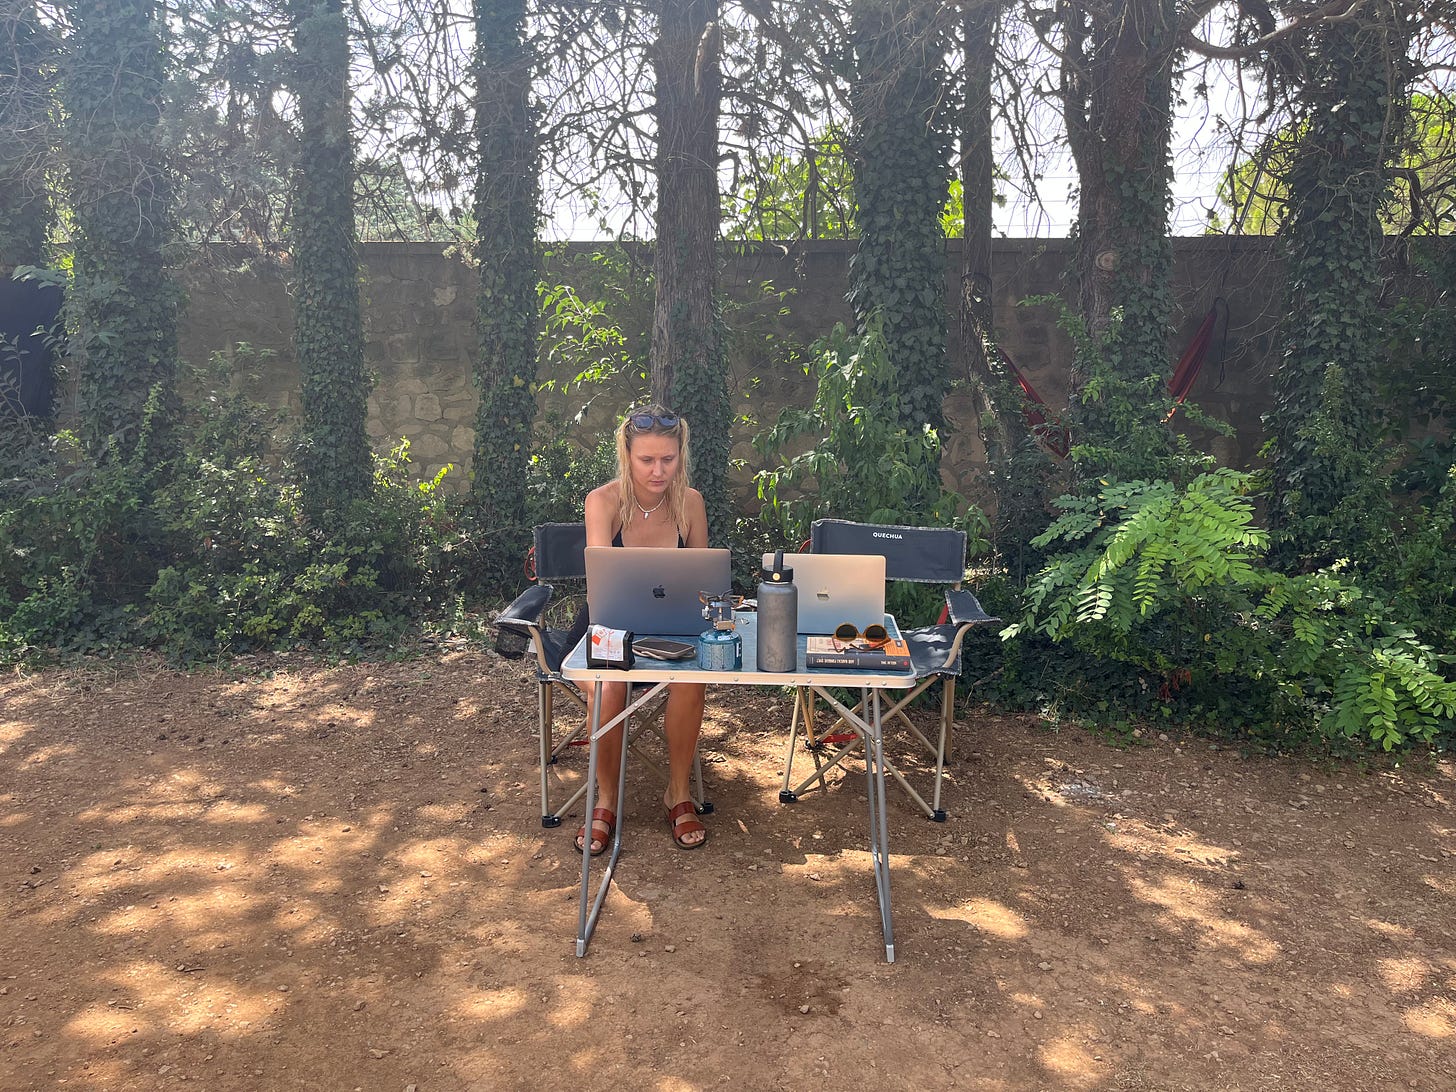 Working on computer in a campground. 